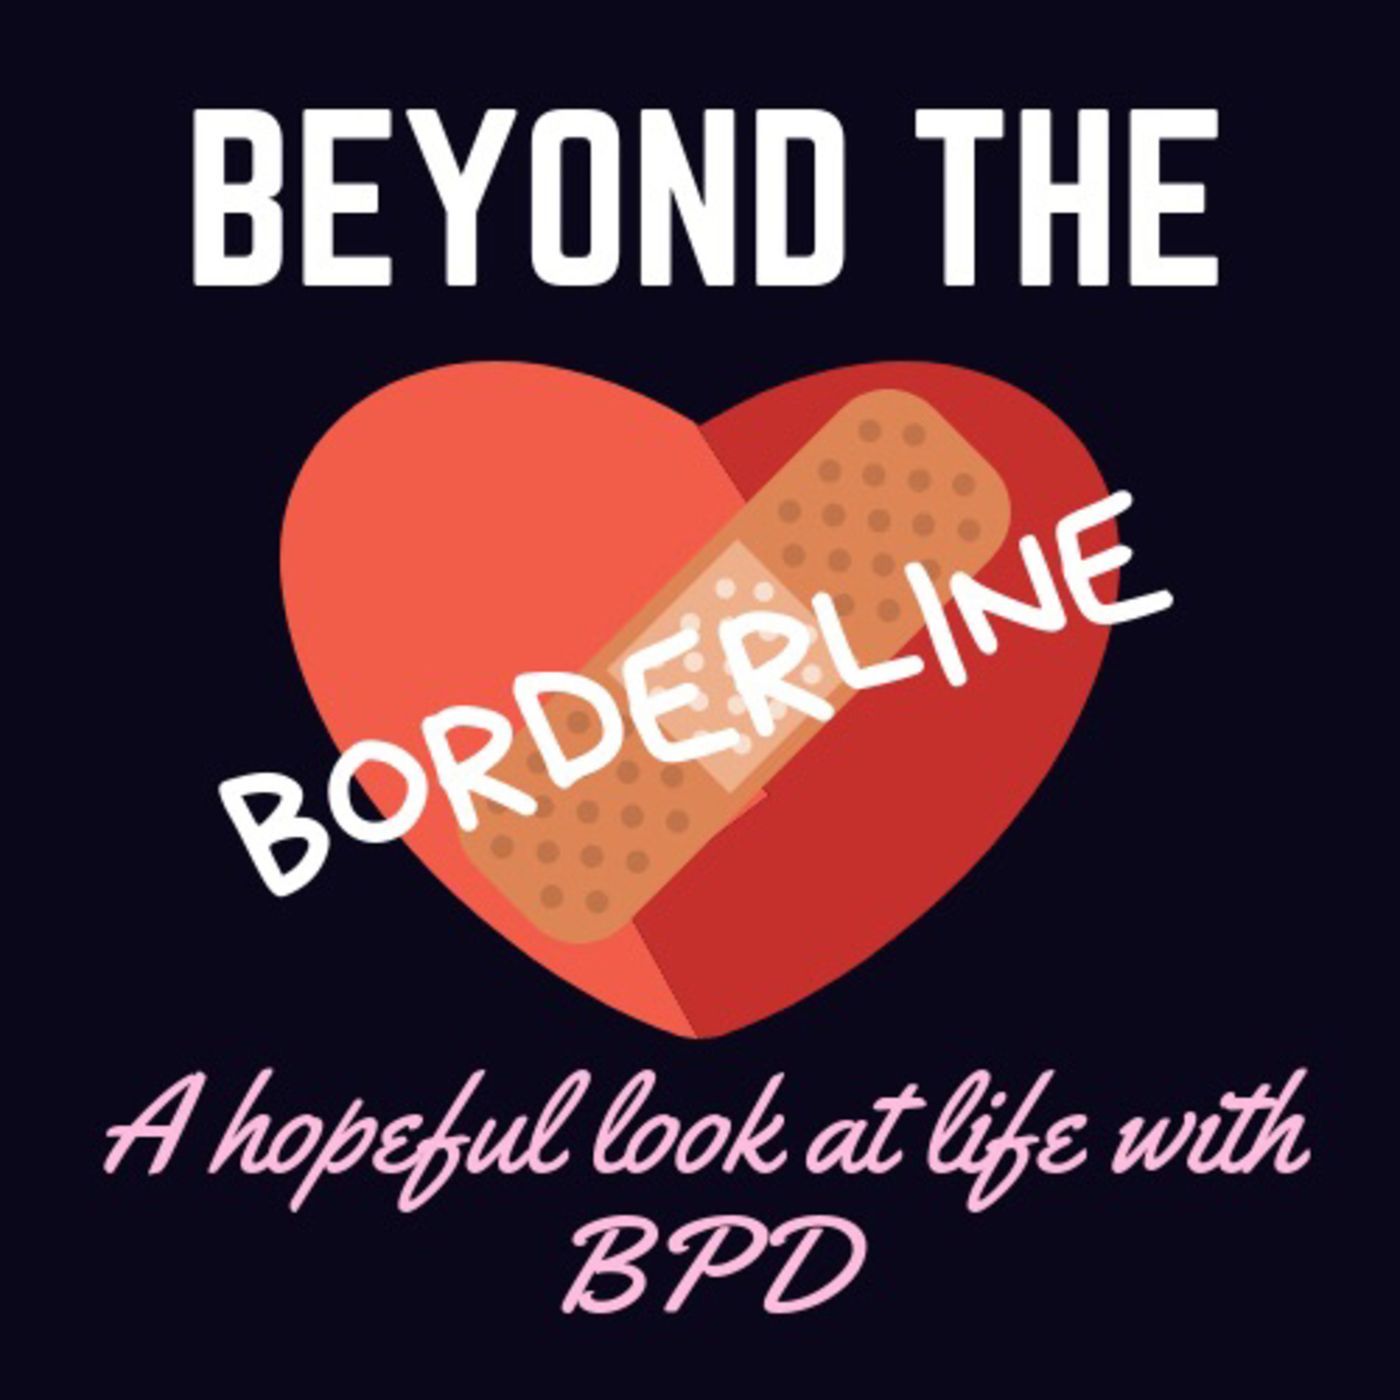 Beyond the Borderline - Coping with social and physical isolation due to COVID-19